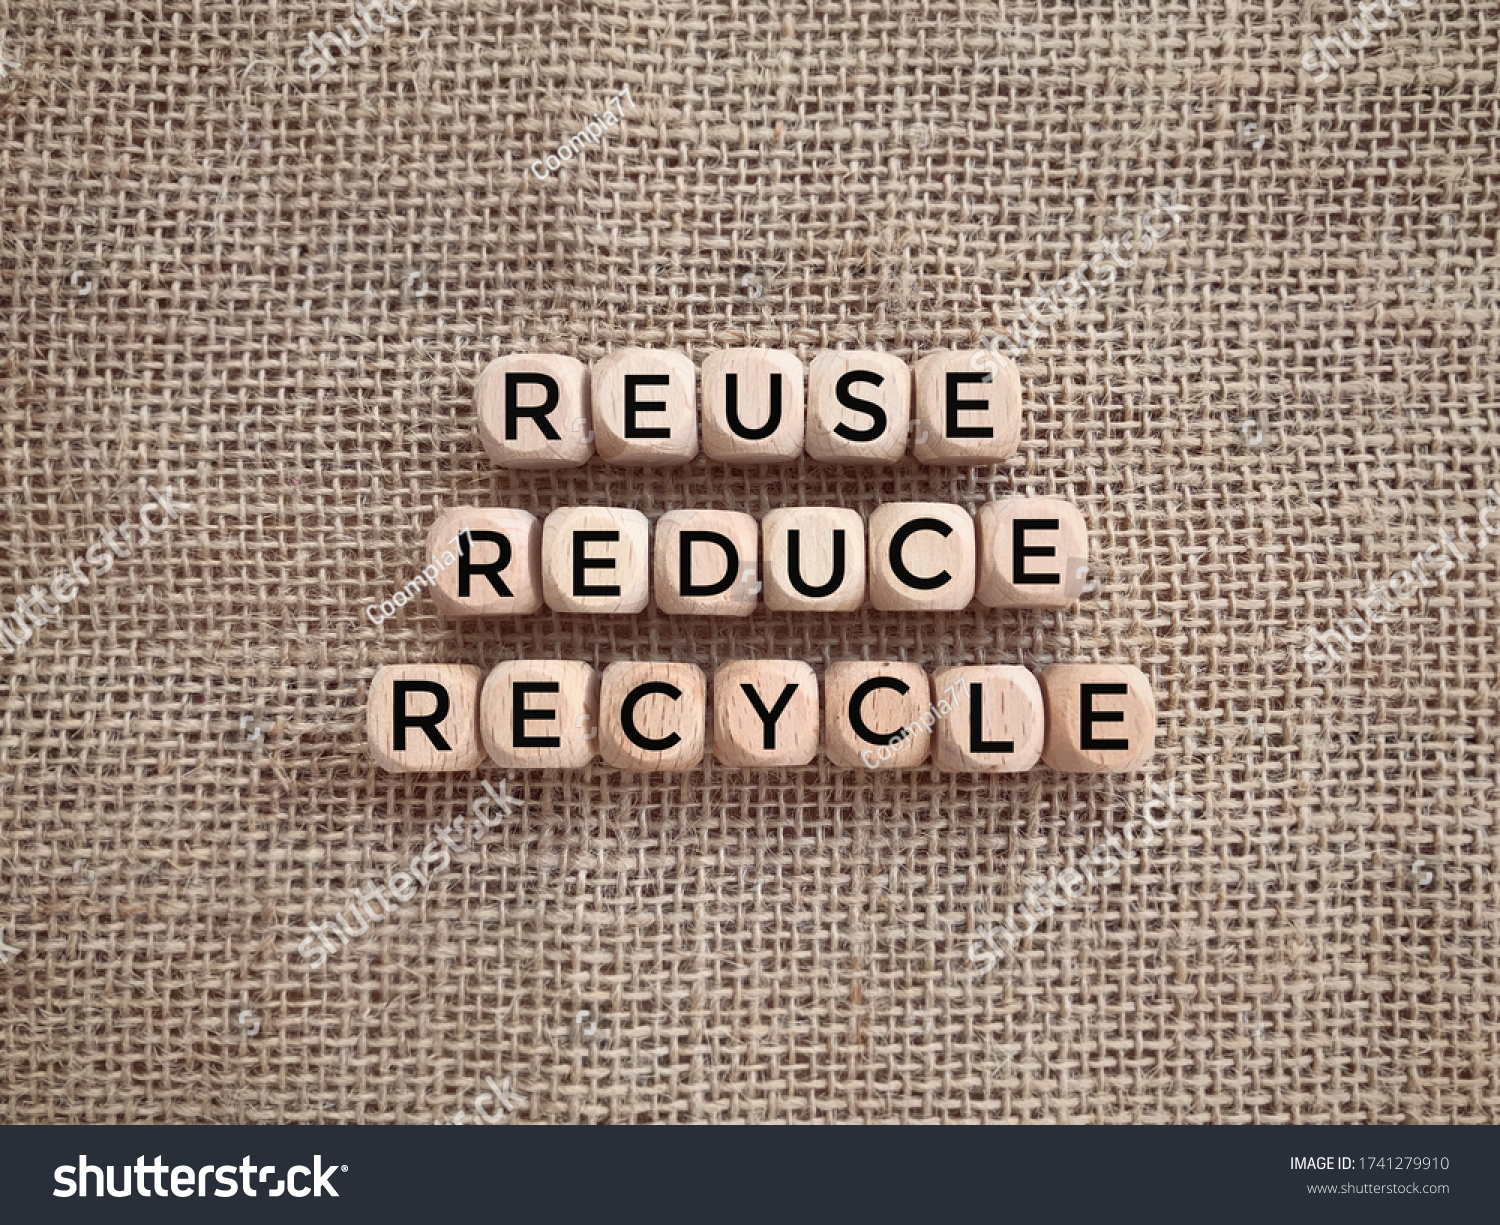 Environmental awareness and educational concept. REUSE, REDUCE and RECYCLE written on wooden blocks. #1741279910